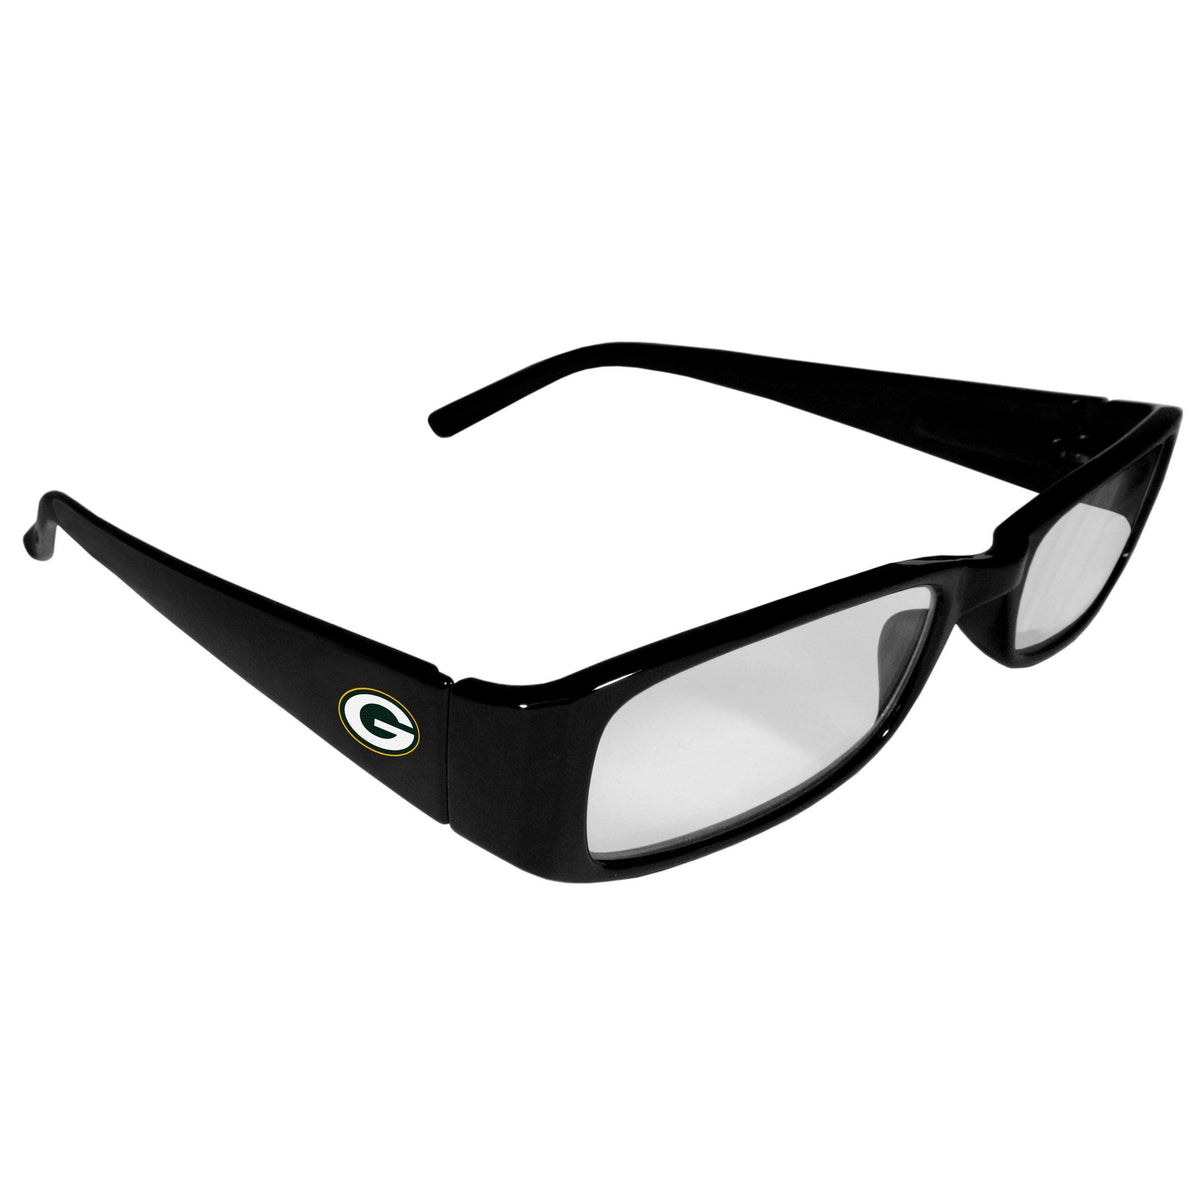 Green Bay Packers Printed Reading Glasses, +1.25 - Flyclothing LLC